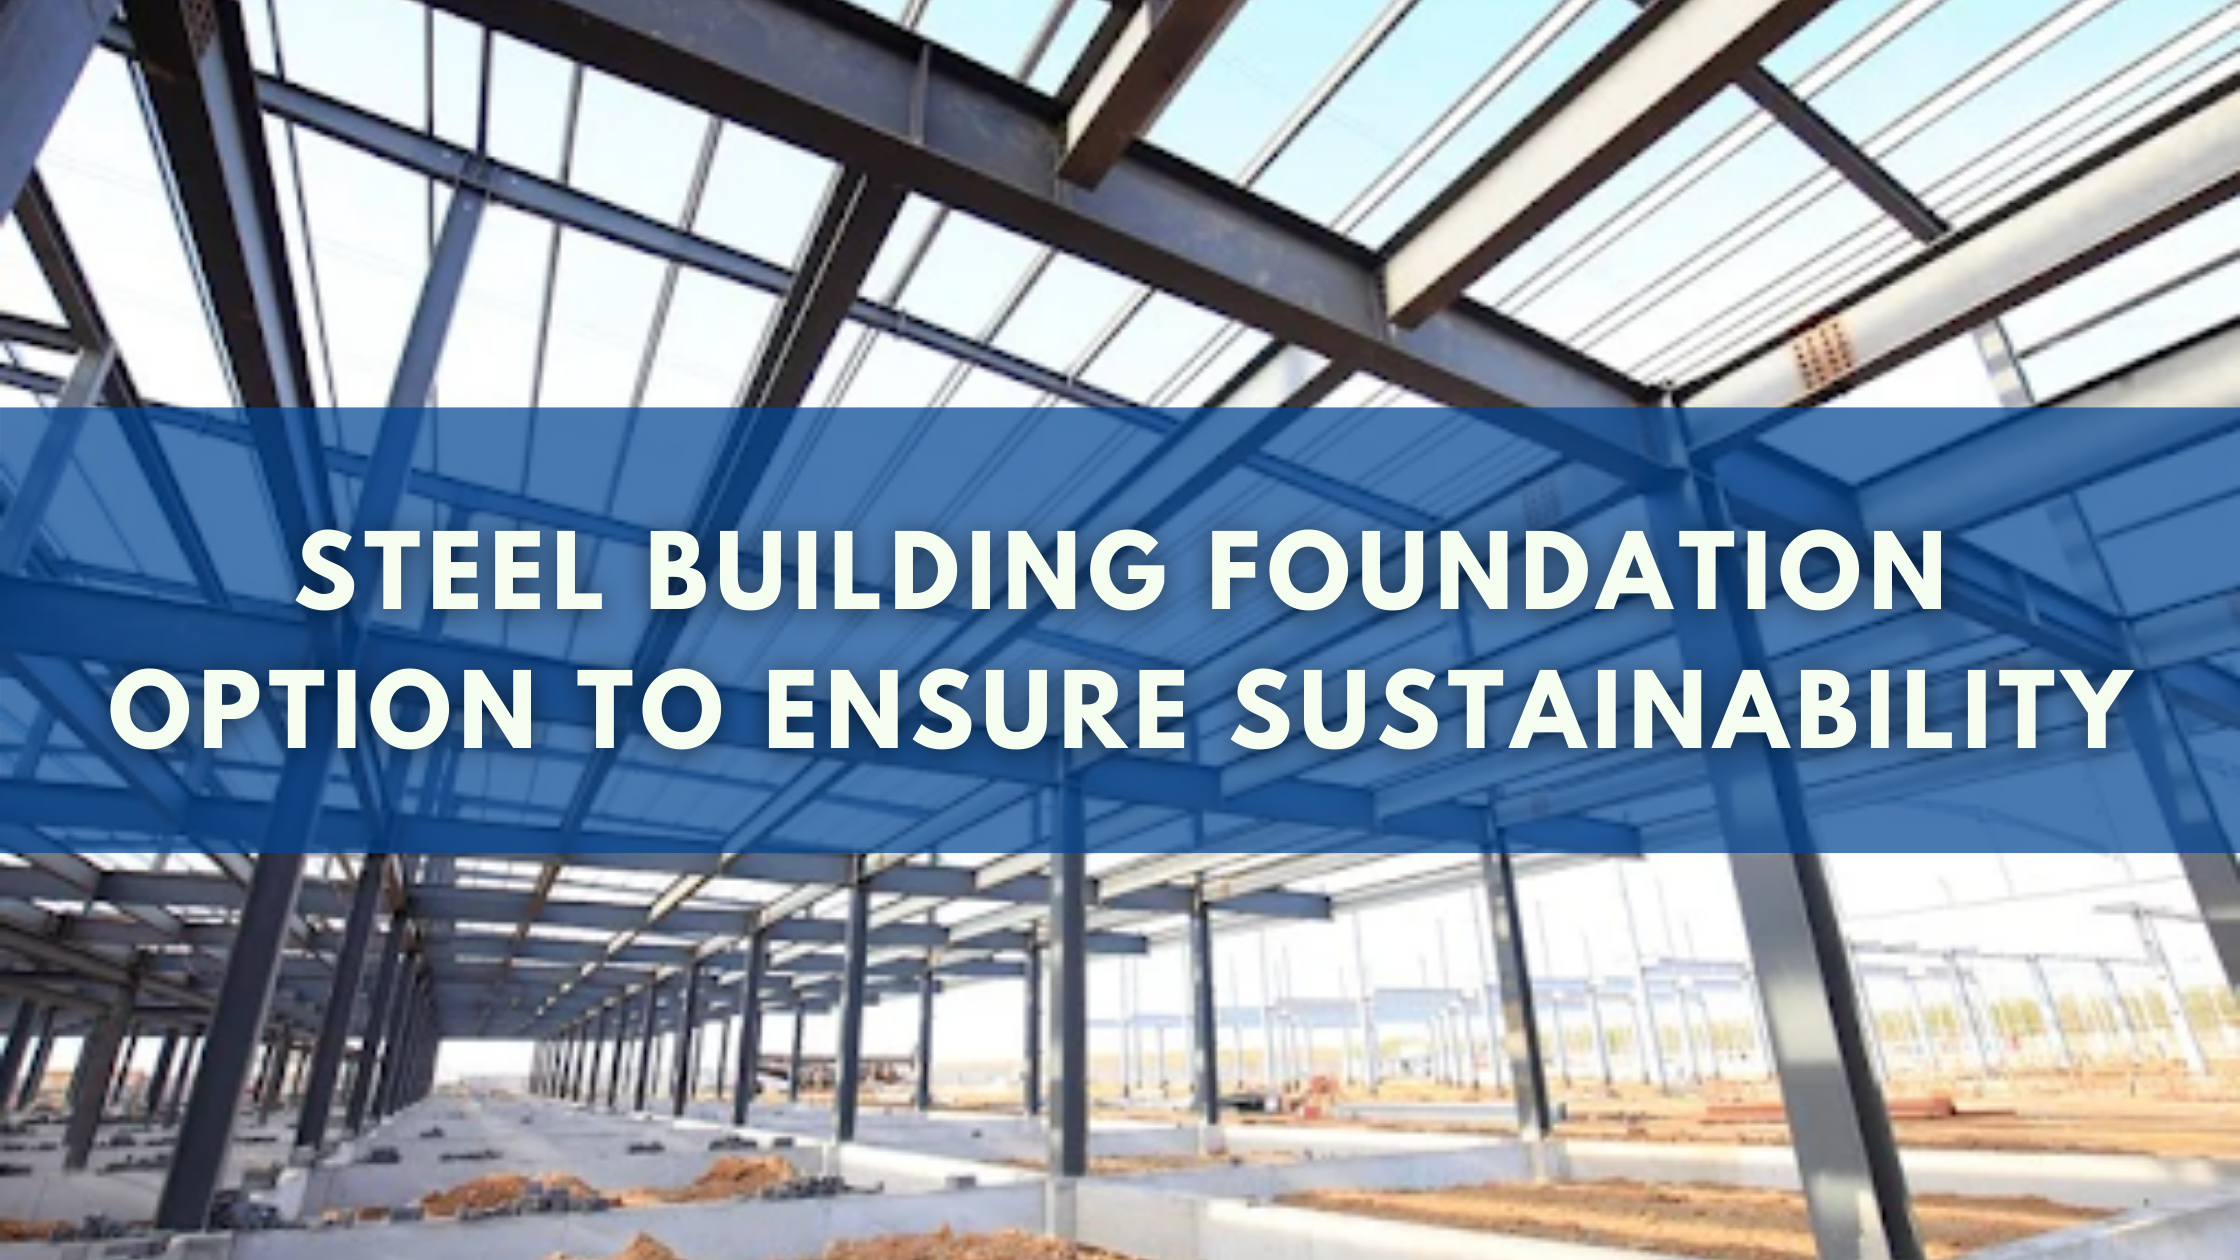 Steel Building Foundation Option to Ensure Sustainability